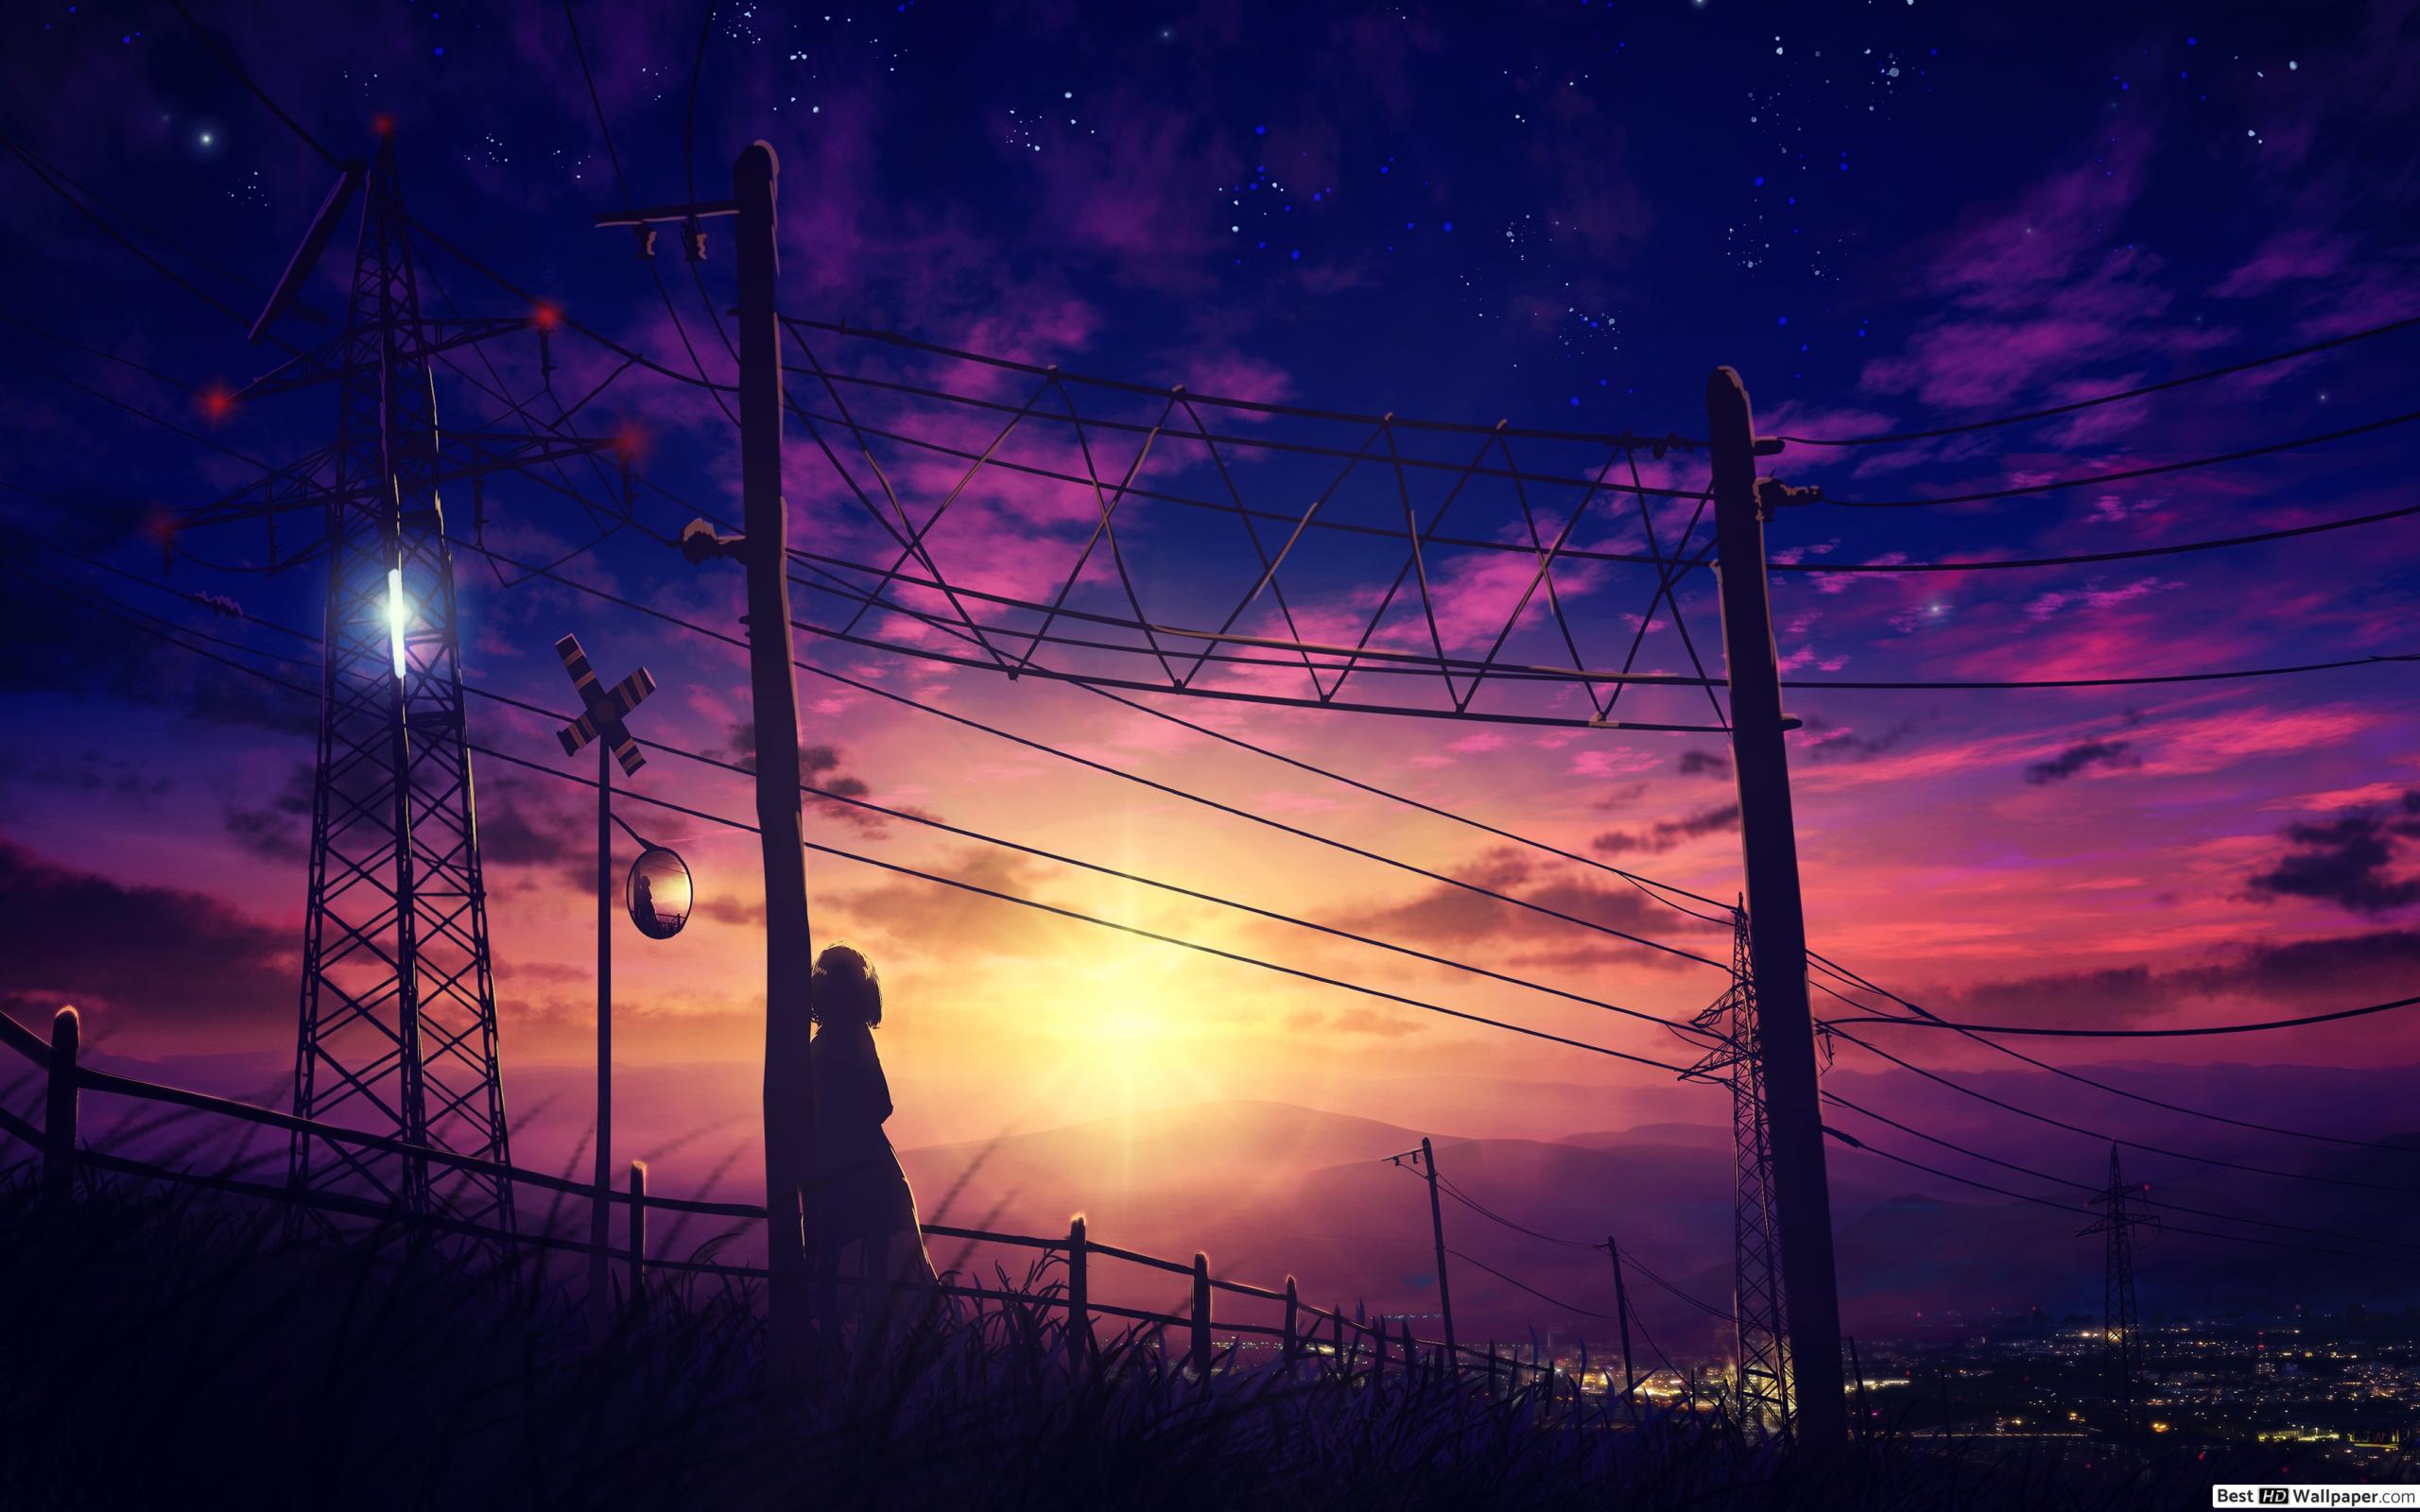 Sunset Anime Scenery HD wallpaper download